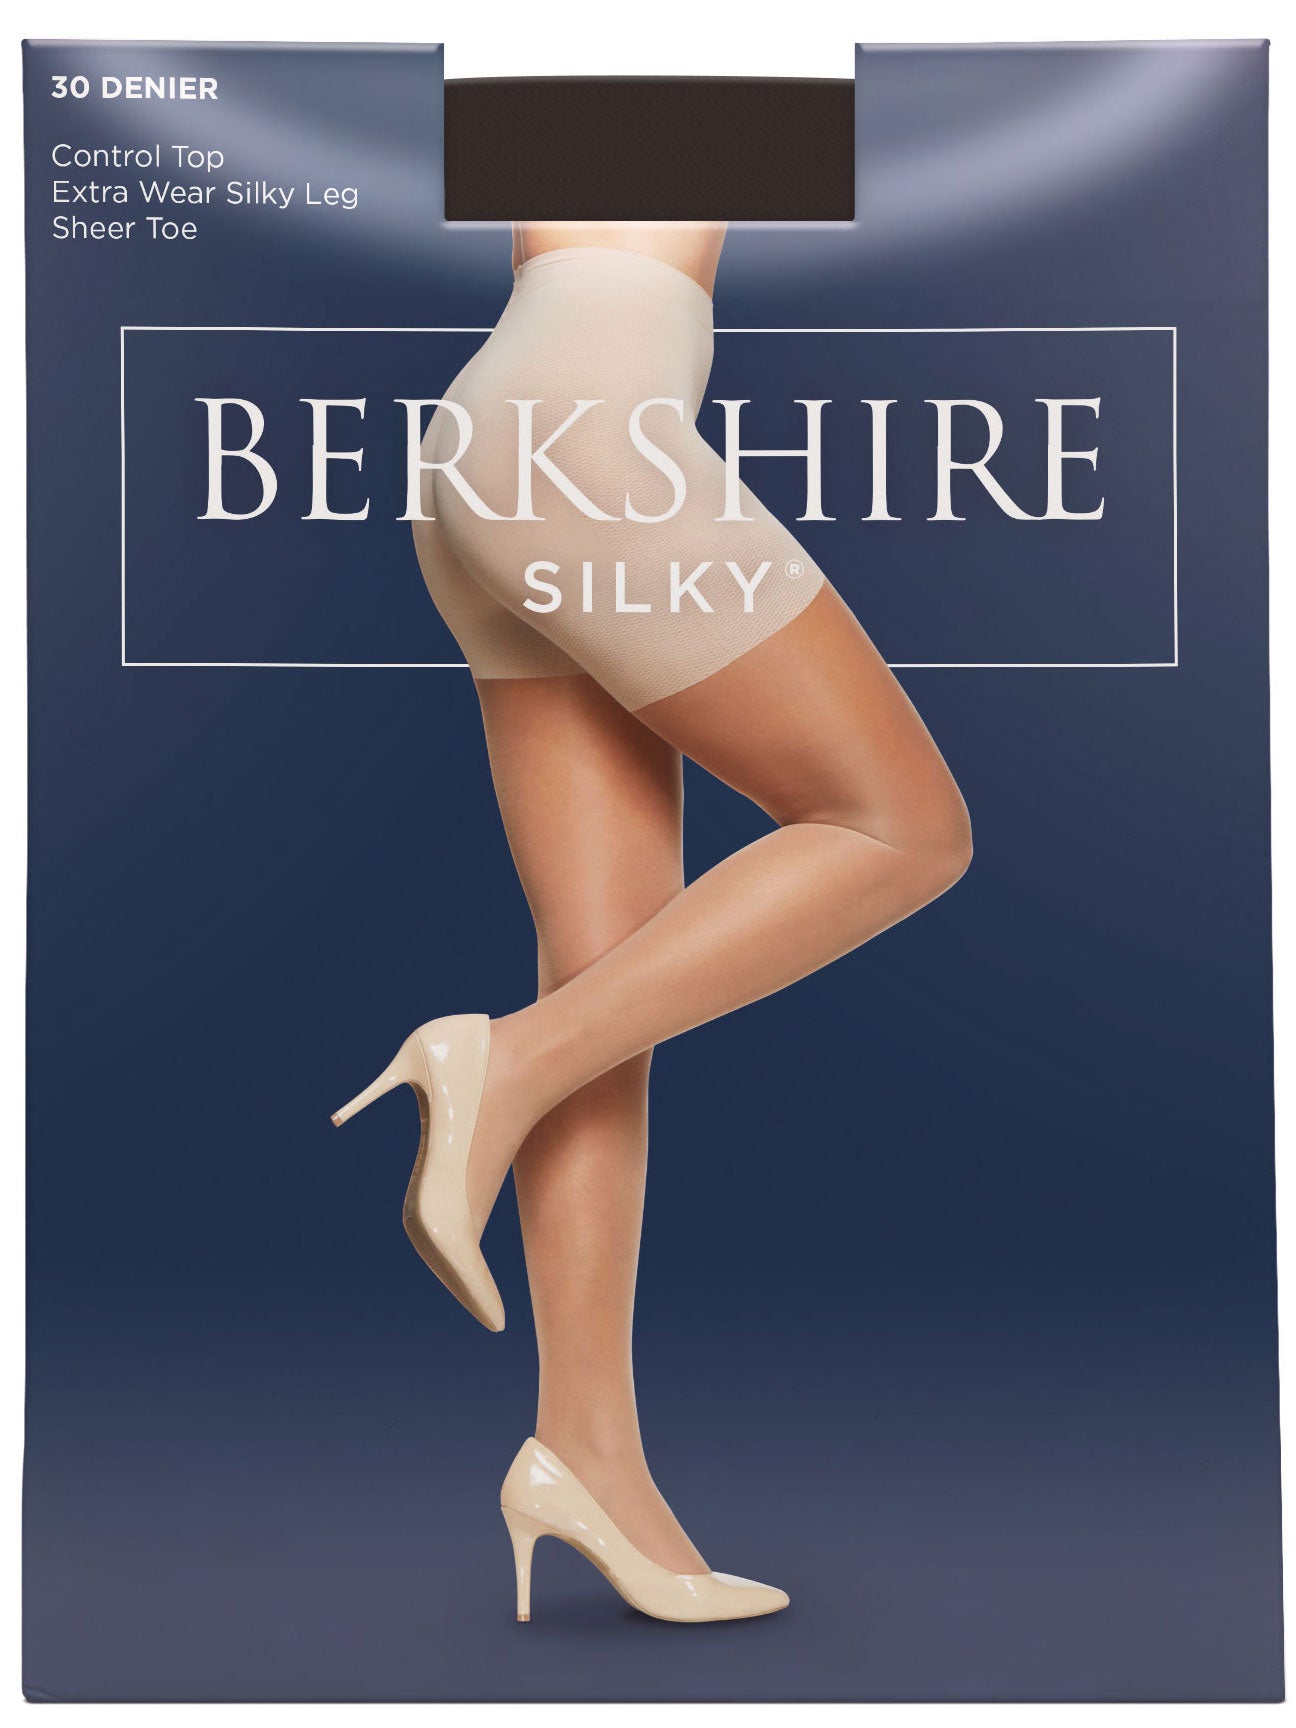 Extra Wear Silky Sheer Control Top Pantyhose with Sandalfoot Toe - 4527